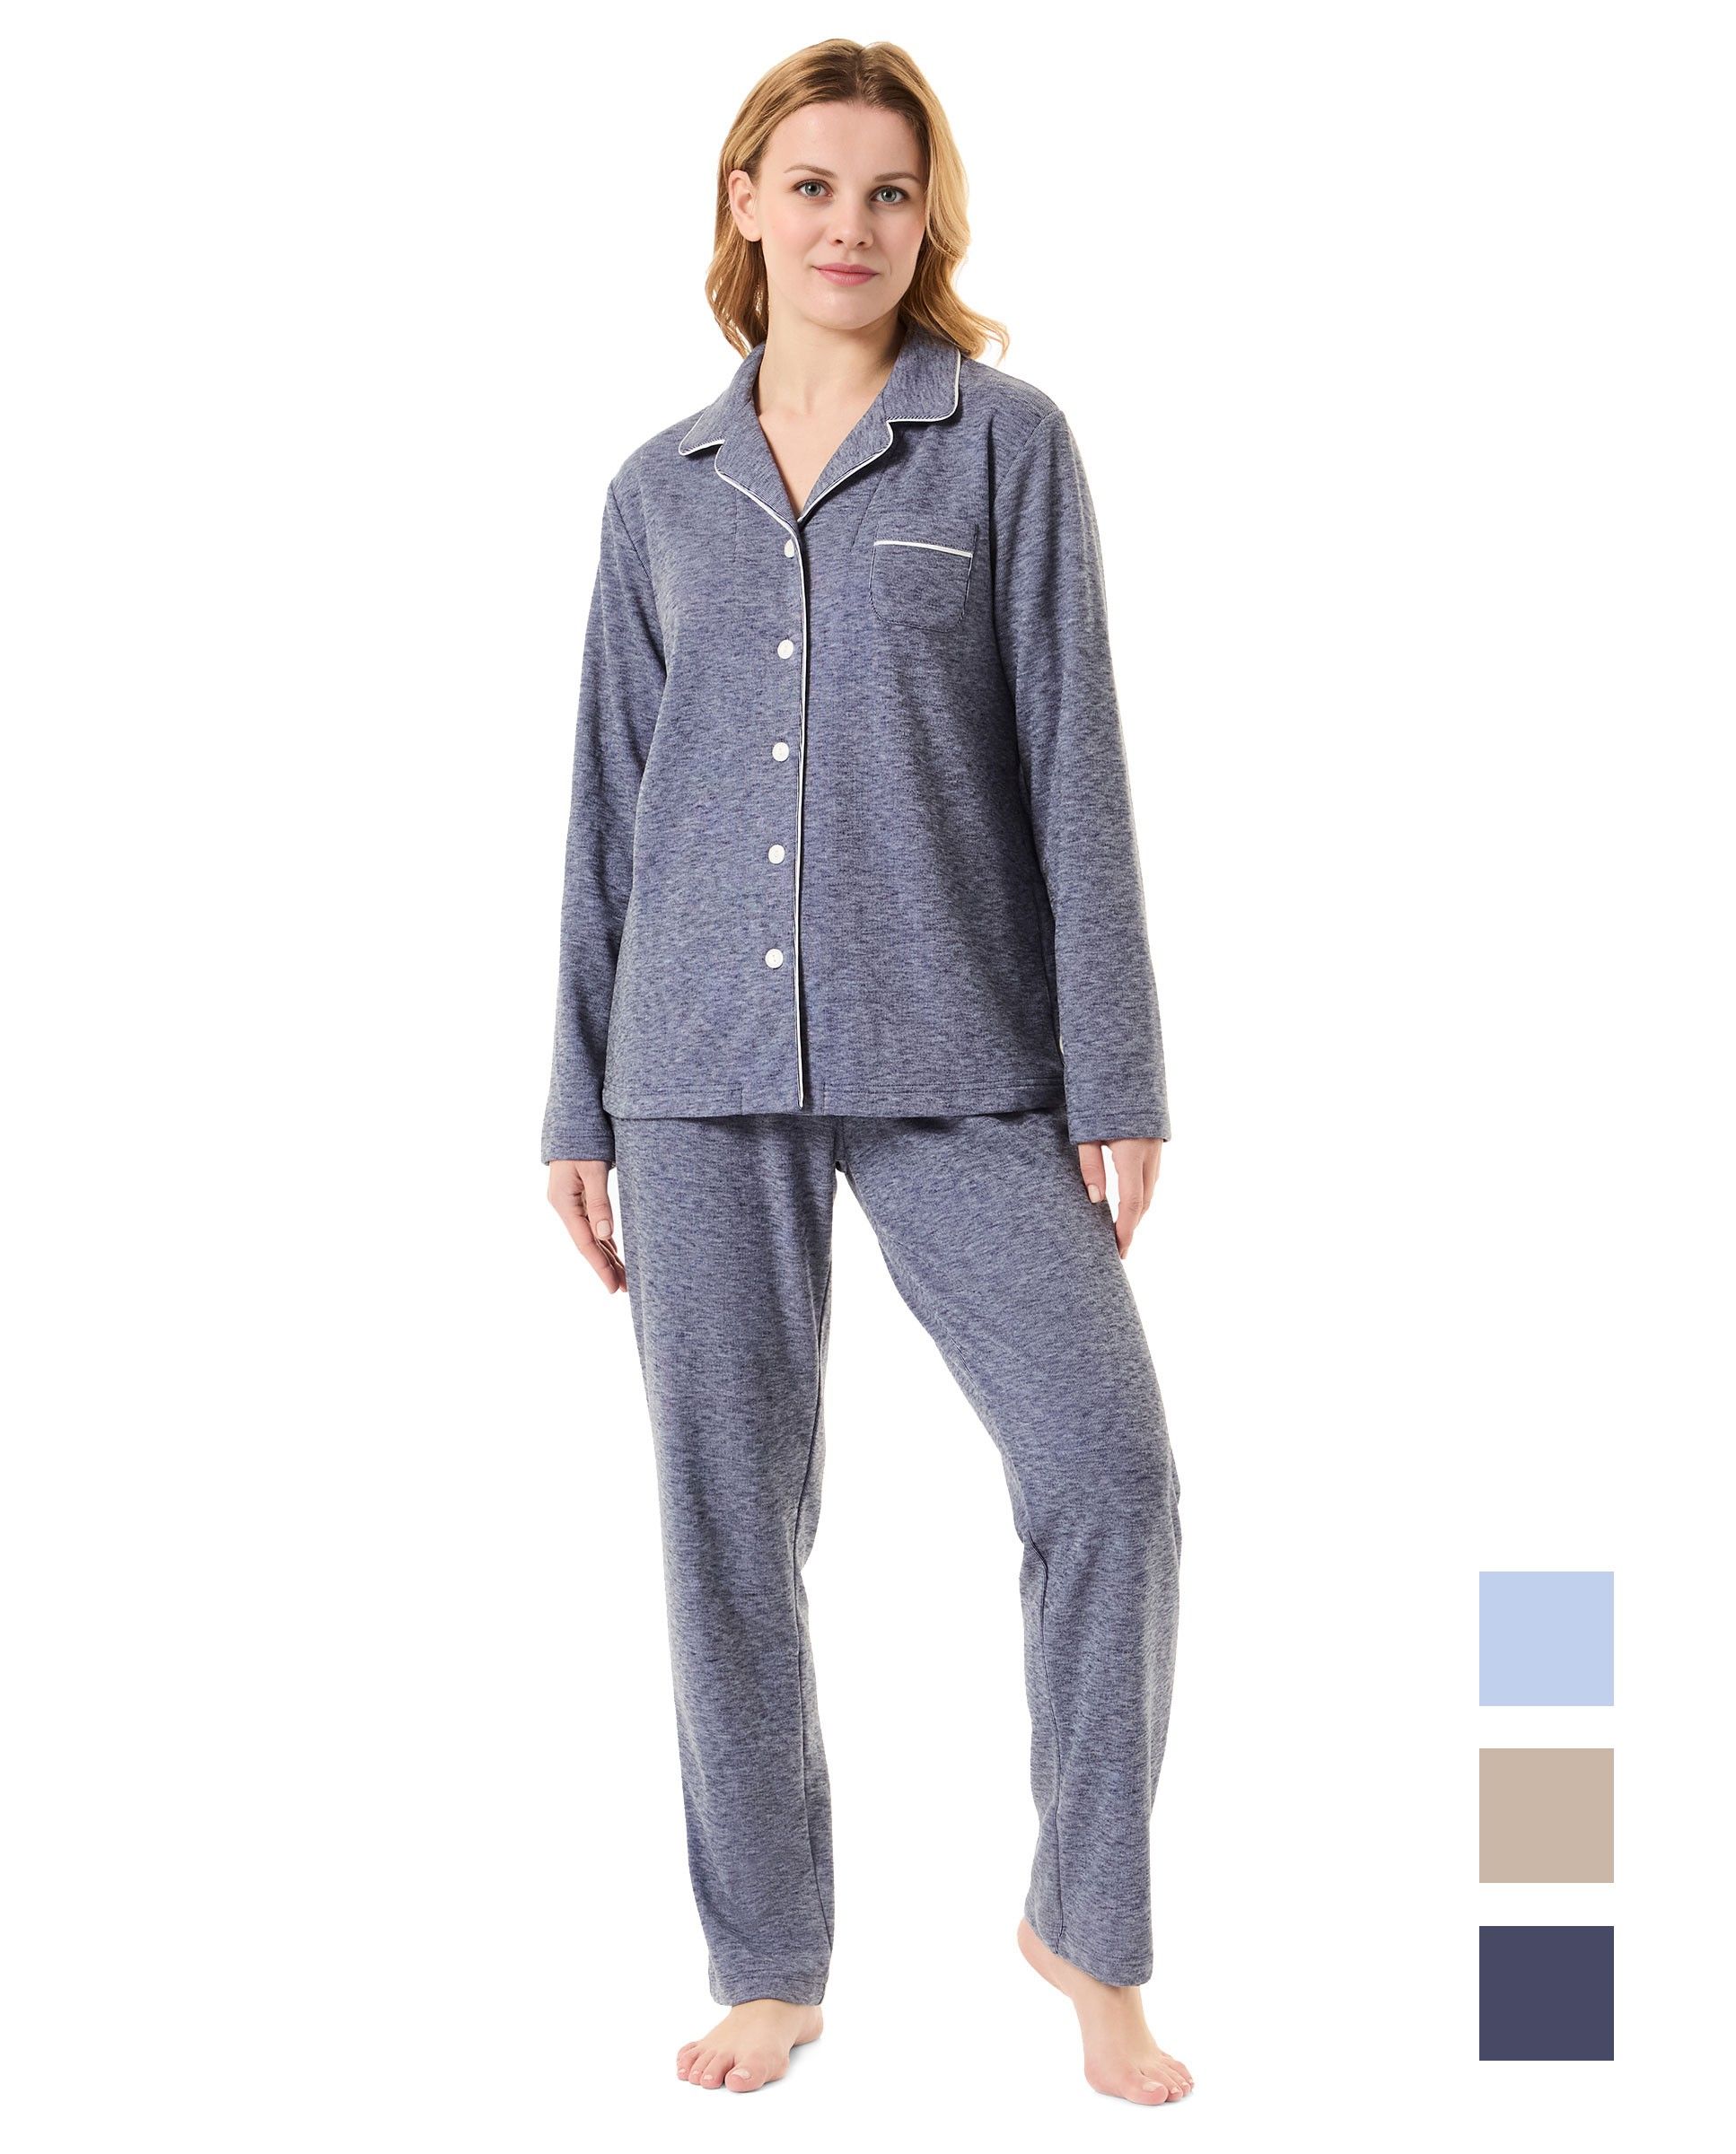 Women's navy long pyjamas with long sleeve jacket, open with buttons with piping, and long trousers with piping.